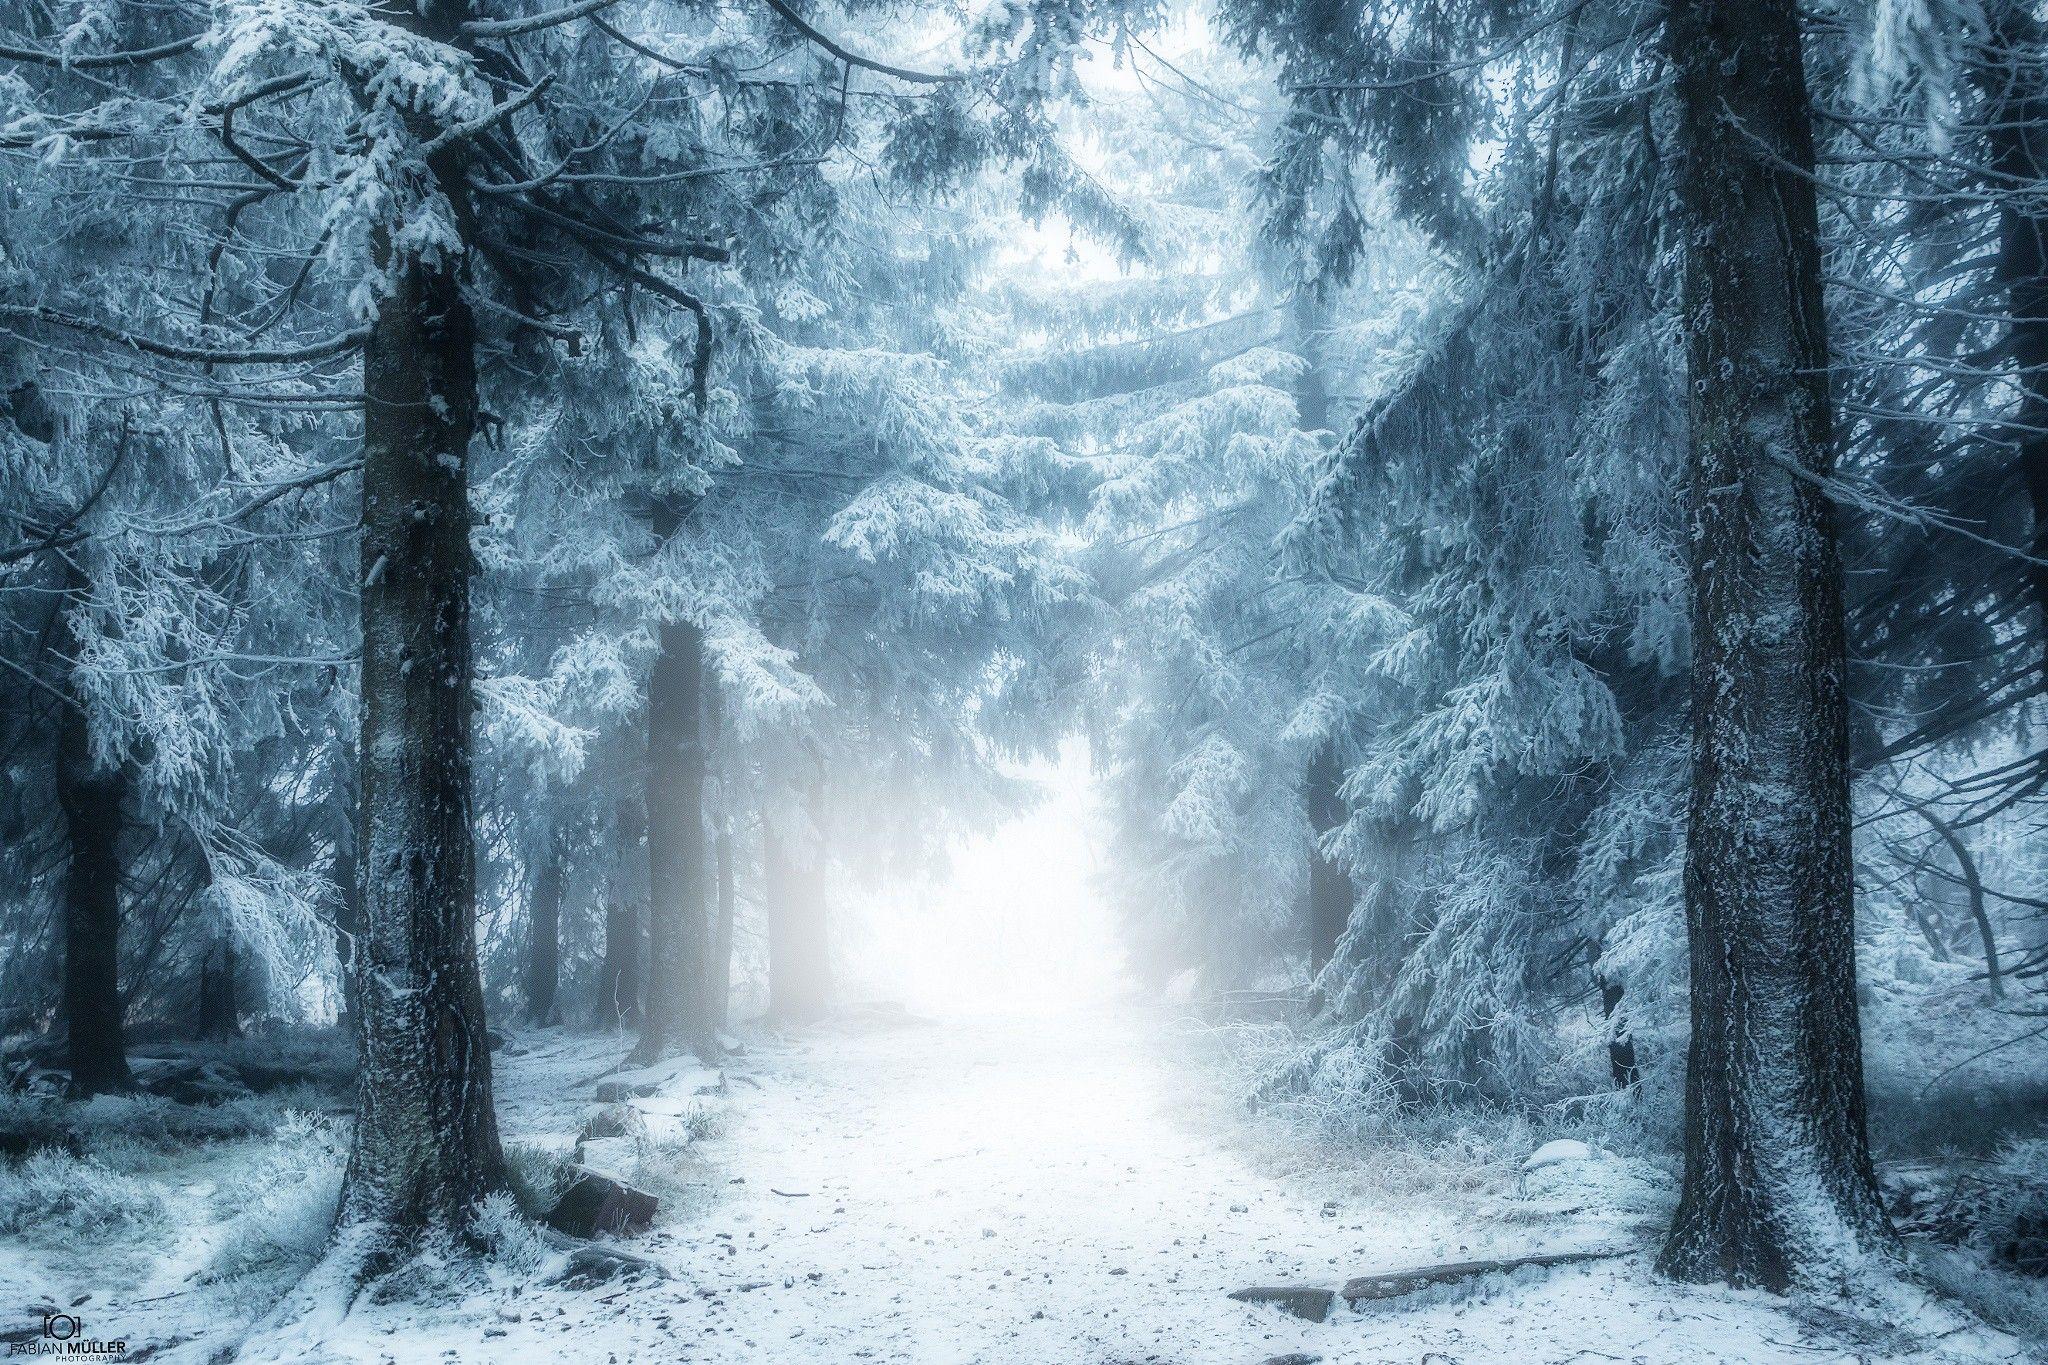 Snowy Nature Wallpapers - Wallpaper Cave